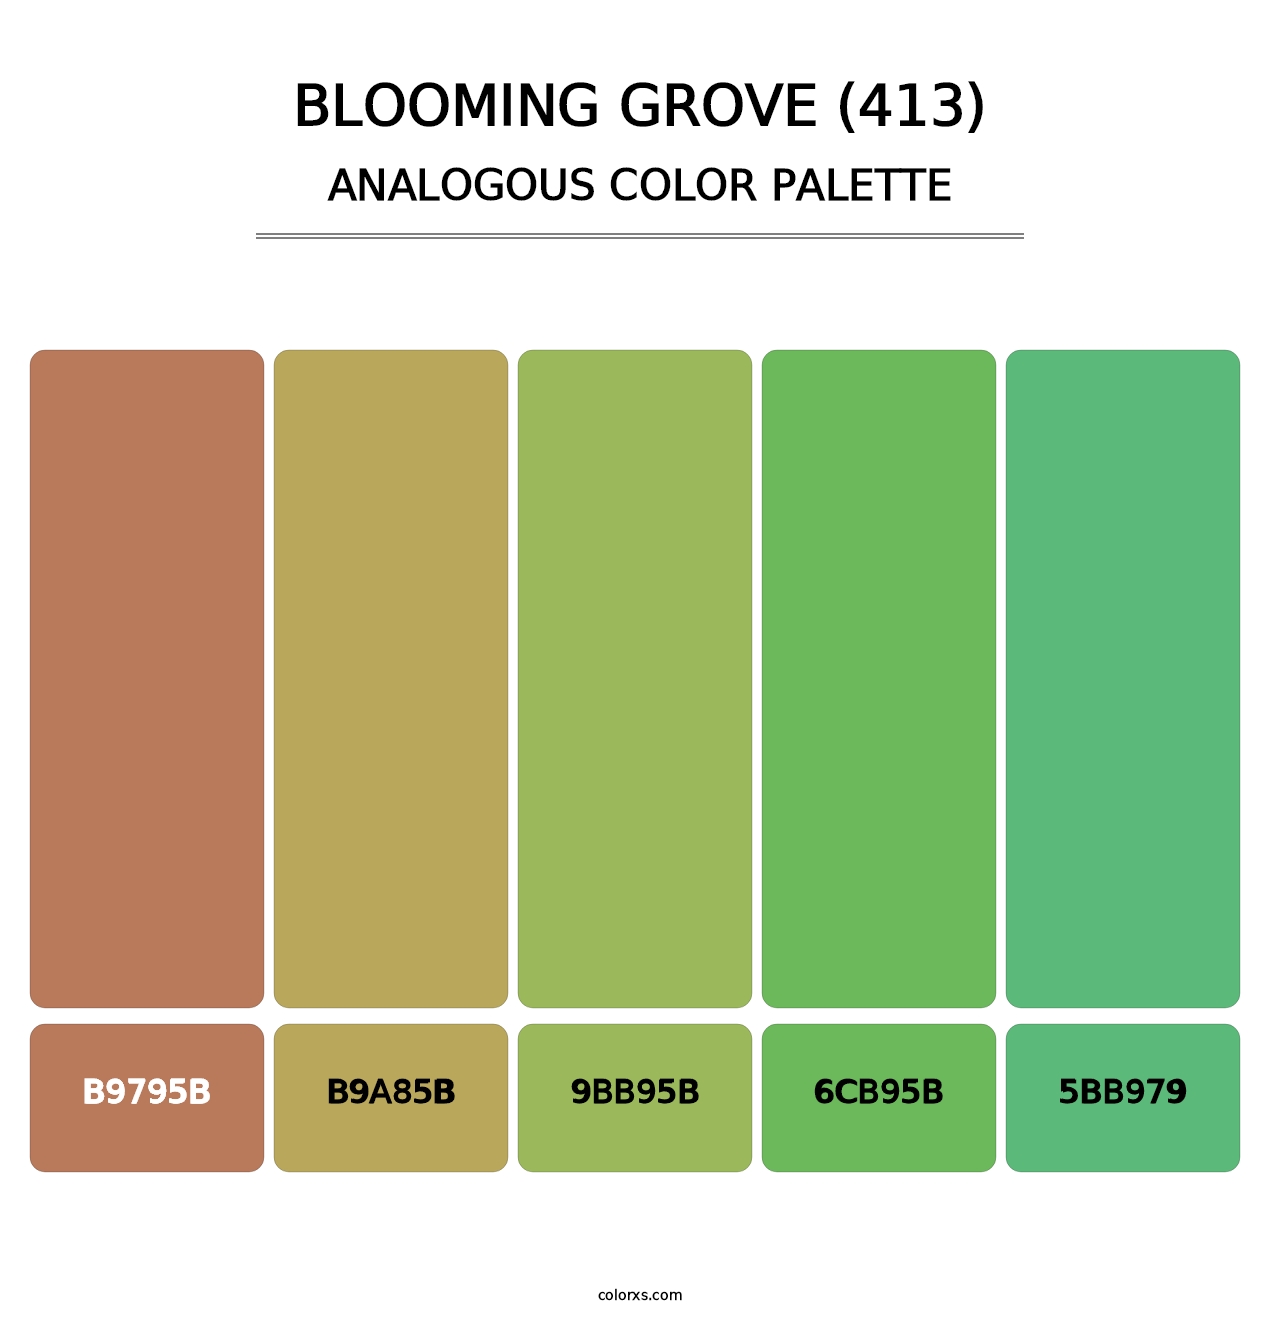 Blooming Grove (413) - Analogous Color Palette